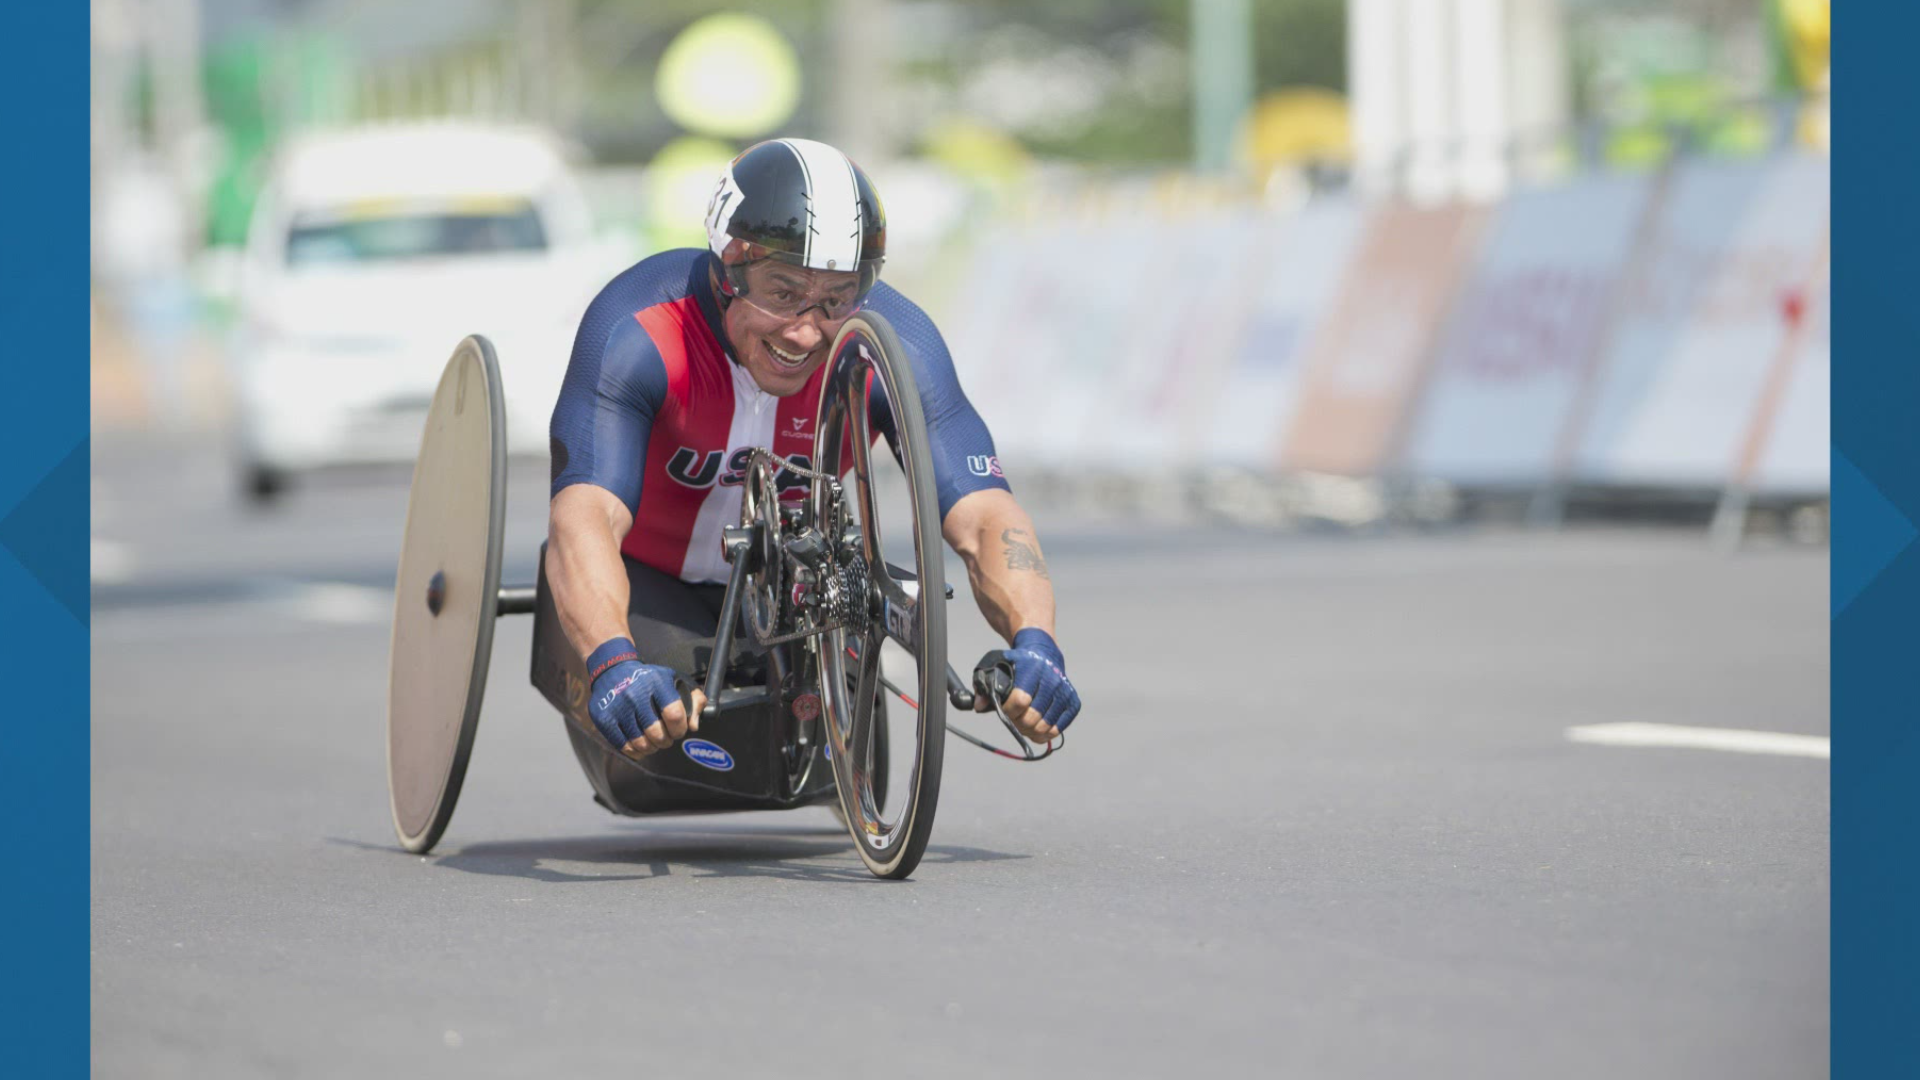 Cyclists will have an opportunity to qualify for the Paralympic Games in Tokyo this coming summer at these events.